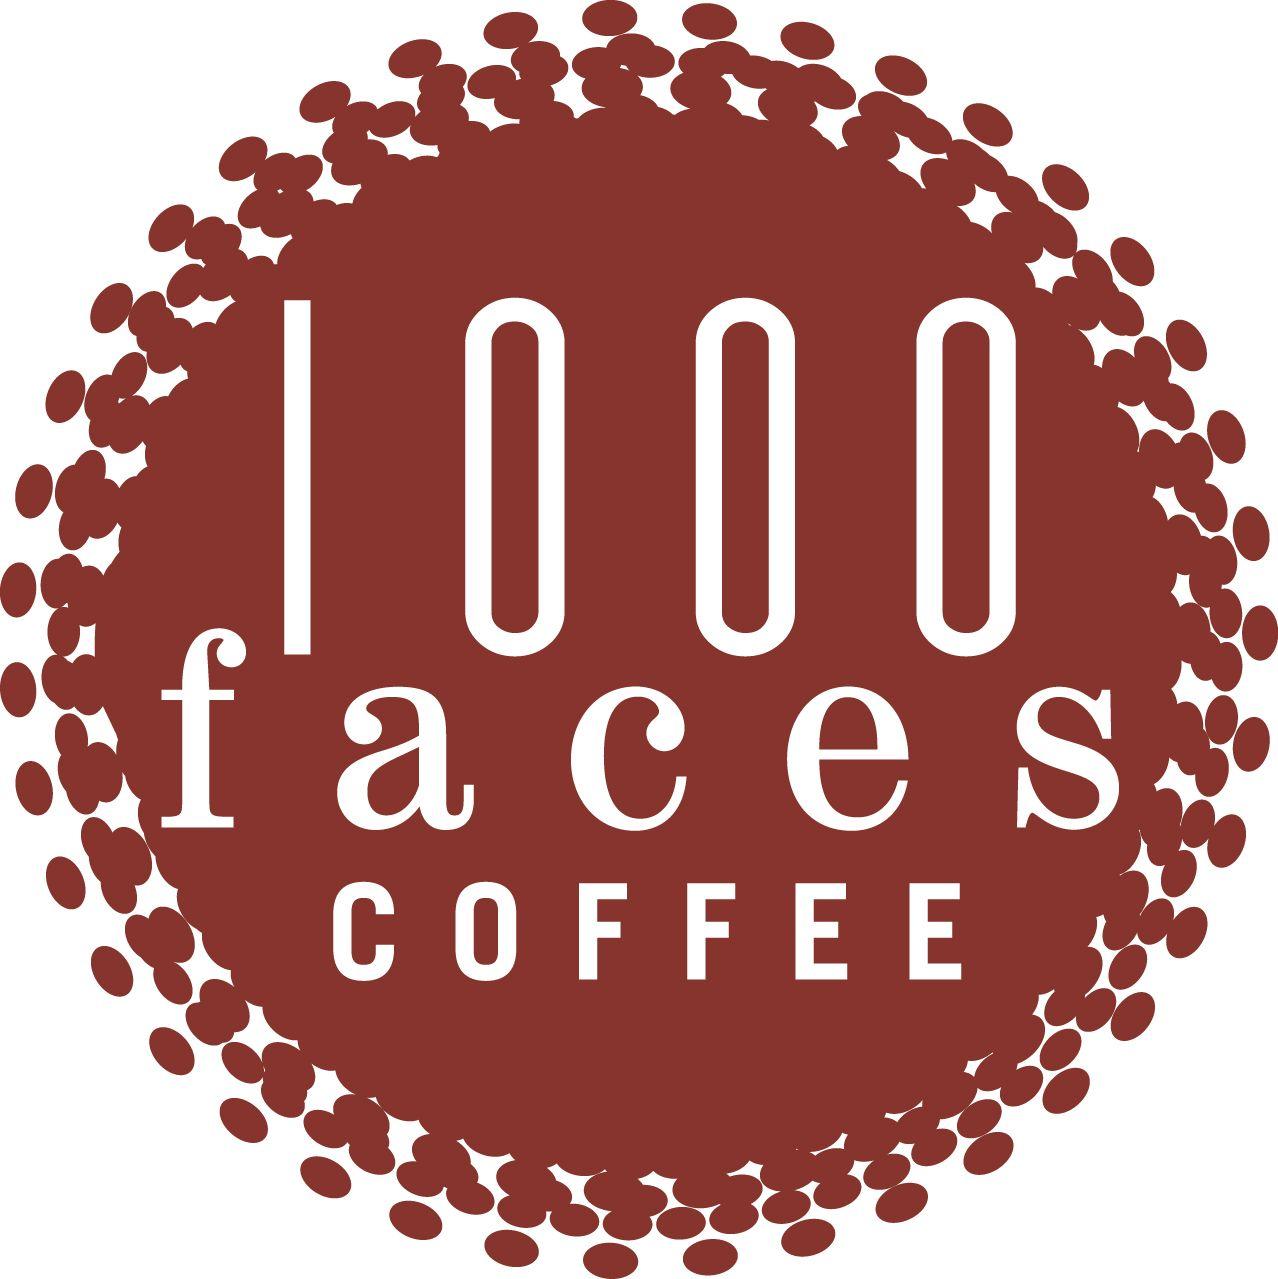 Red and Coffee Logo - 1000 Faces Coffee